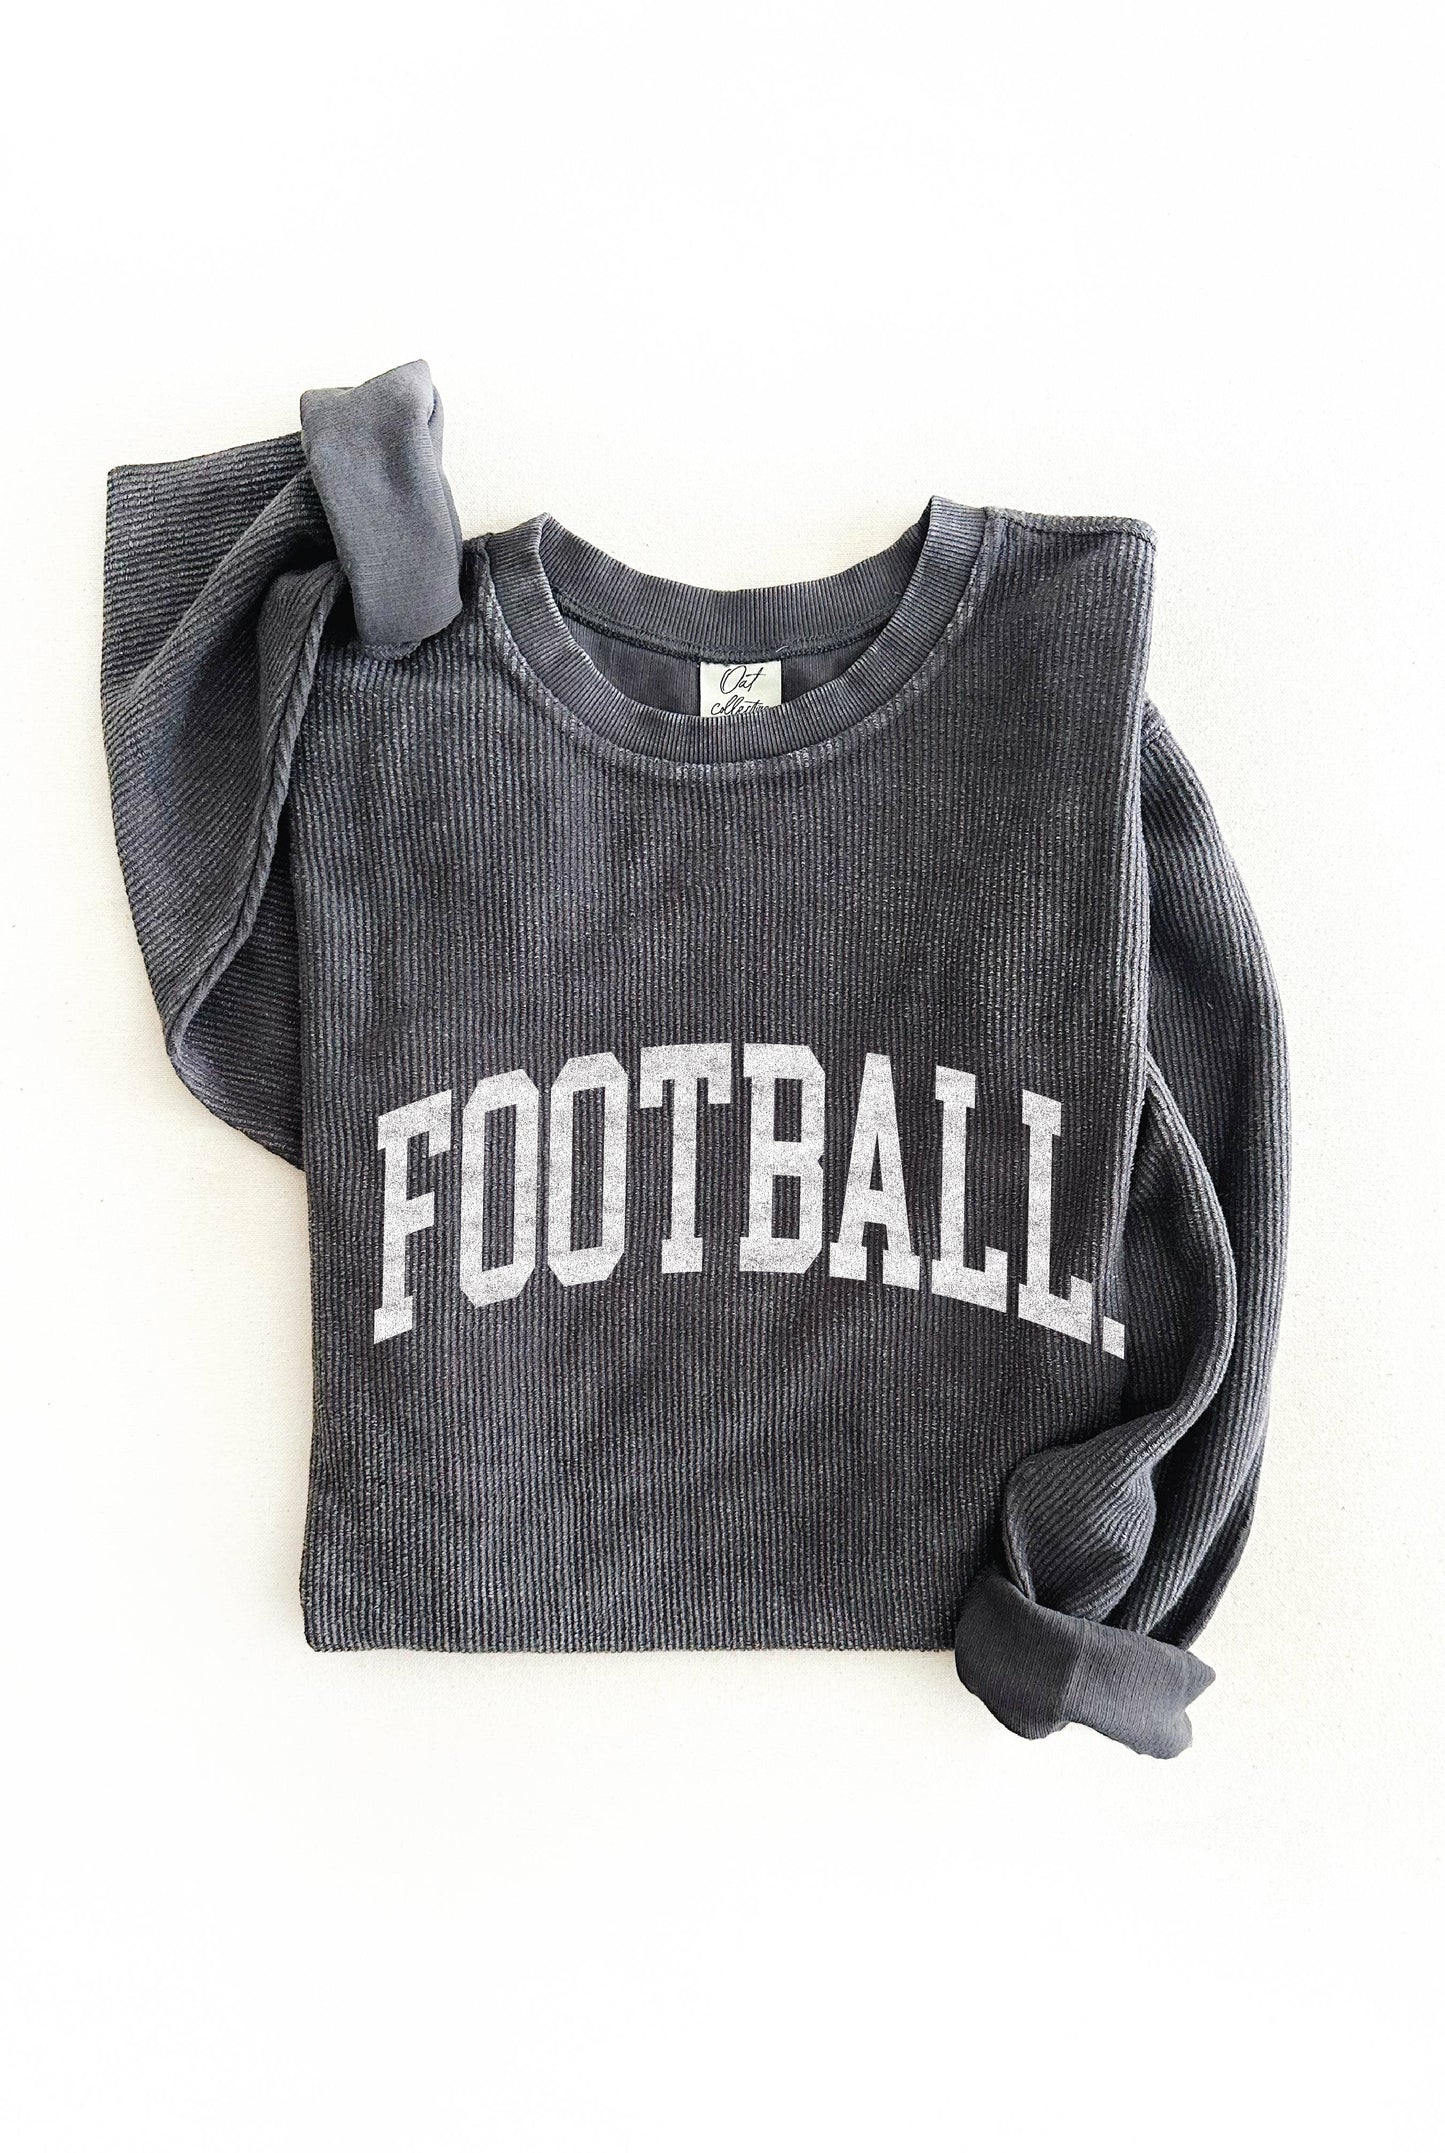 OAT COLLECTIVE - FOOTBALL Thermal Vintage Pullover